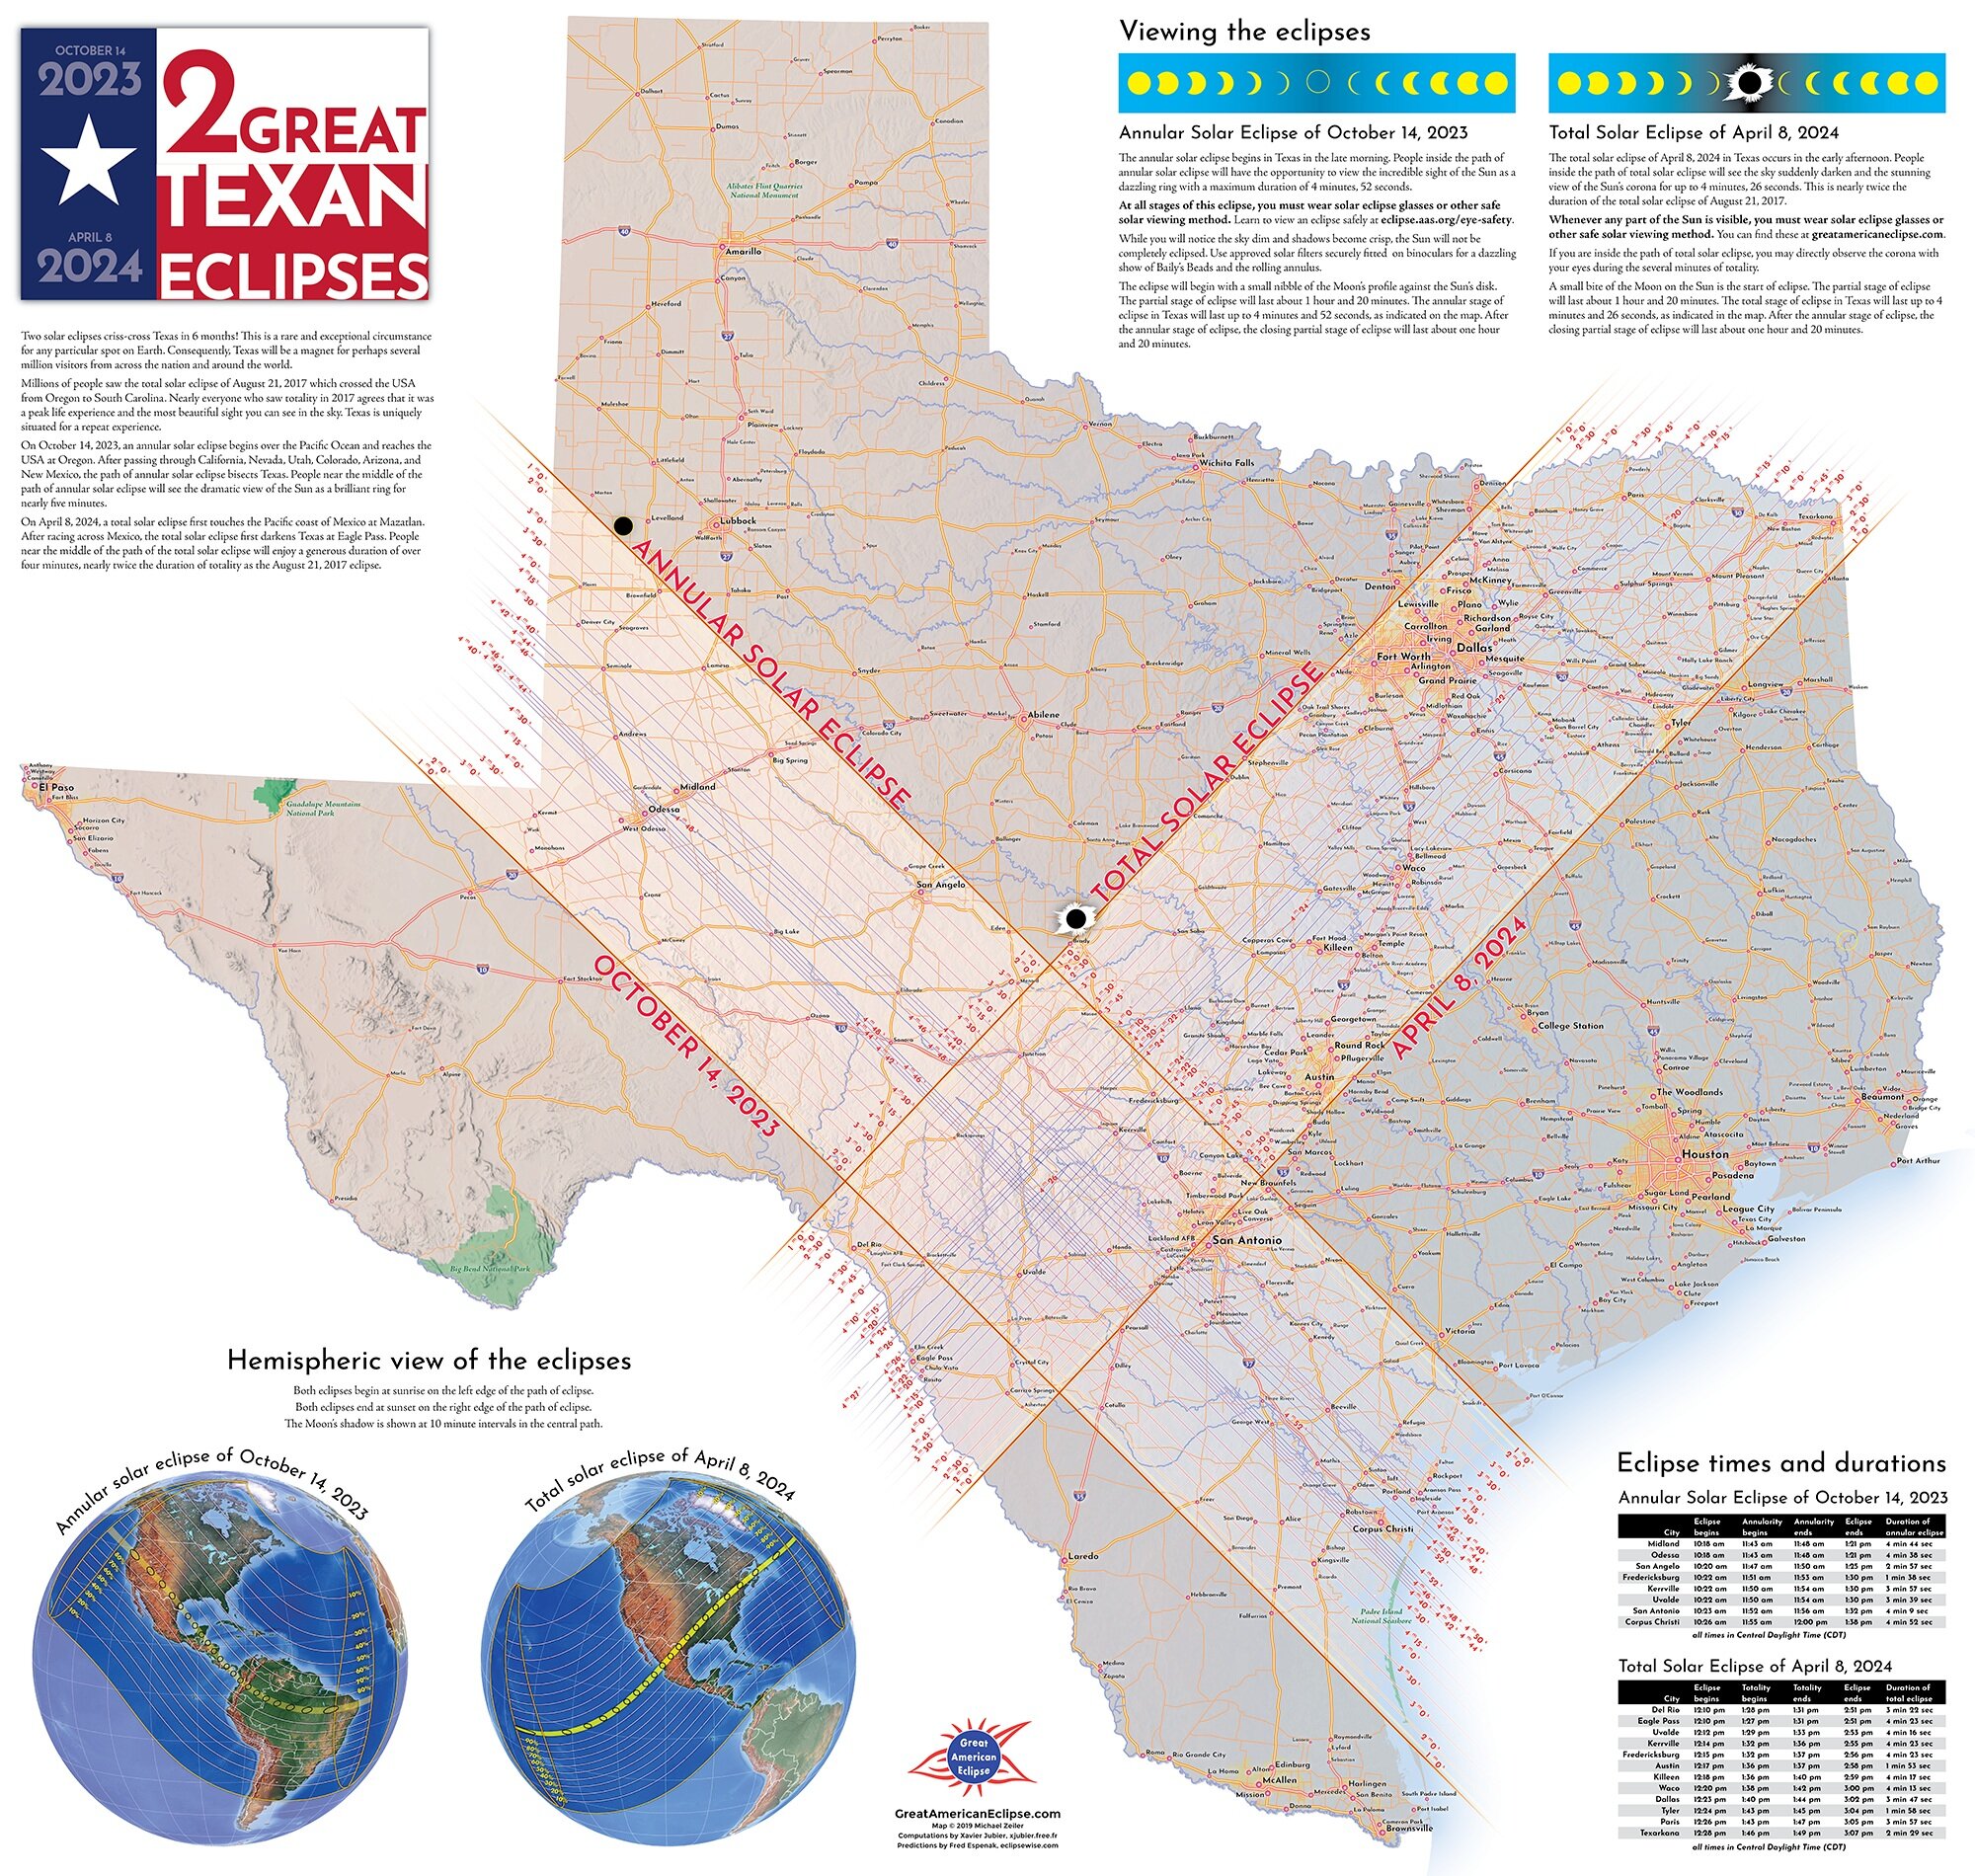 Map of Texas for 2023 annular solar eclipse and 2024 total solar